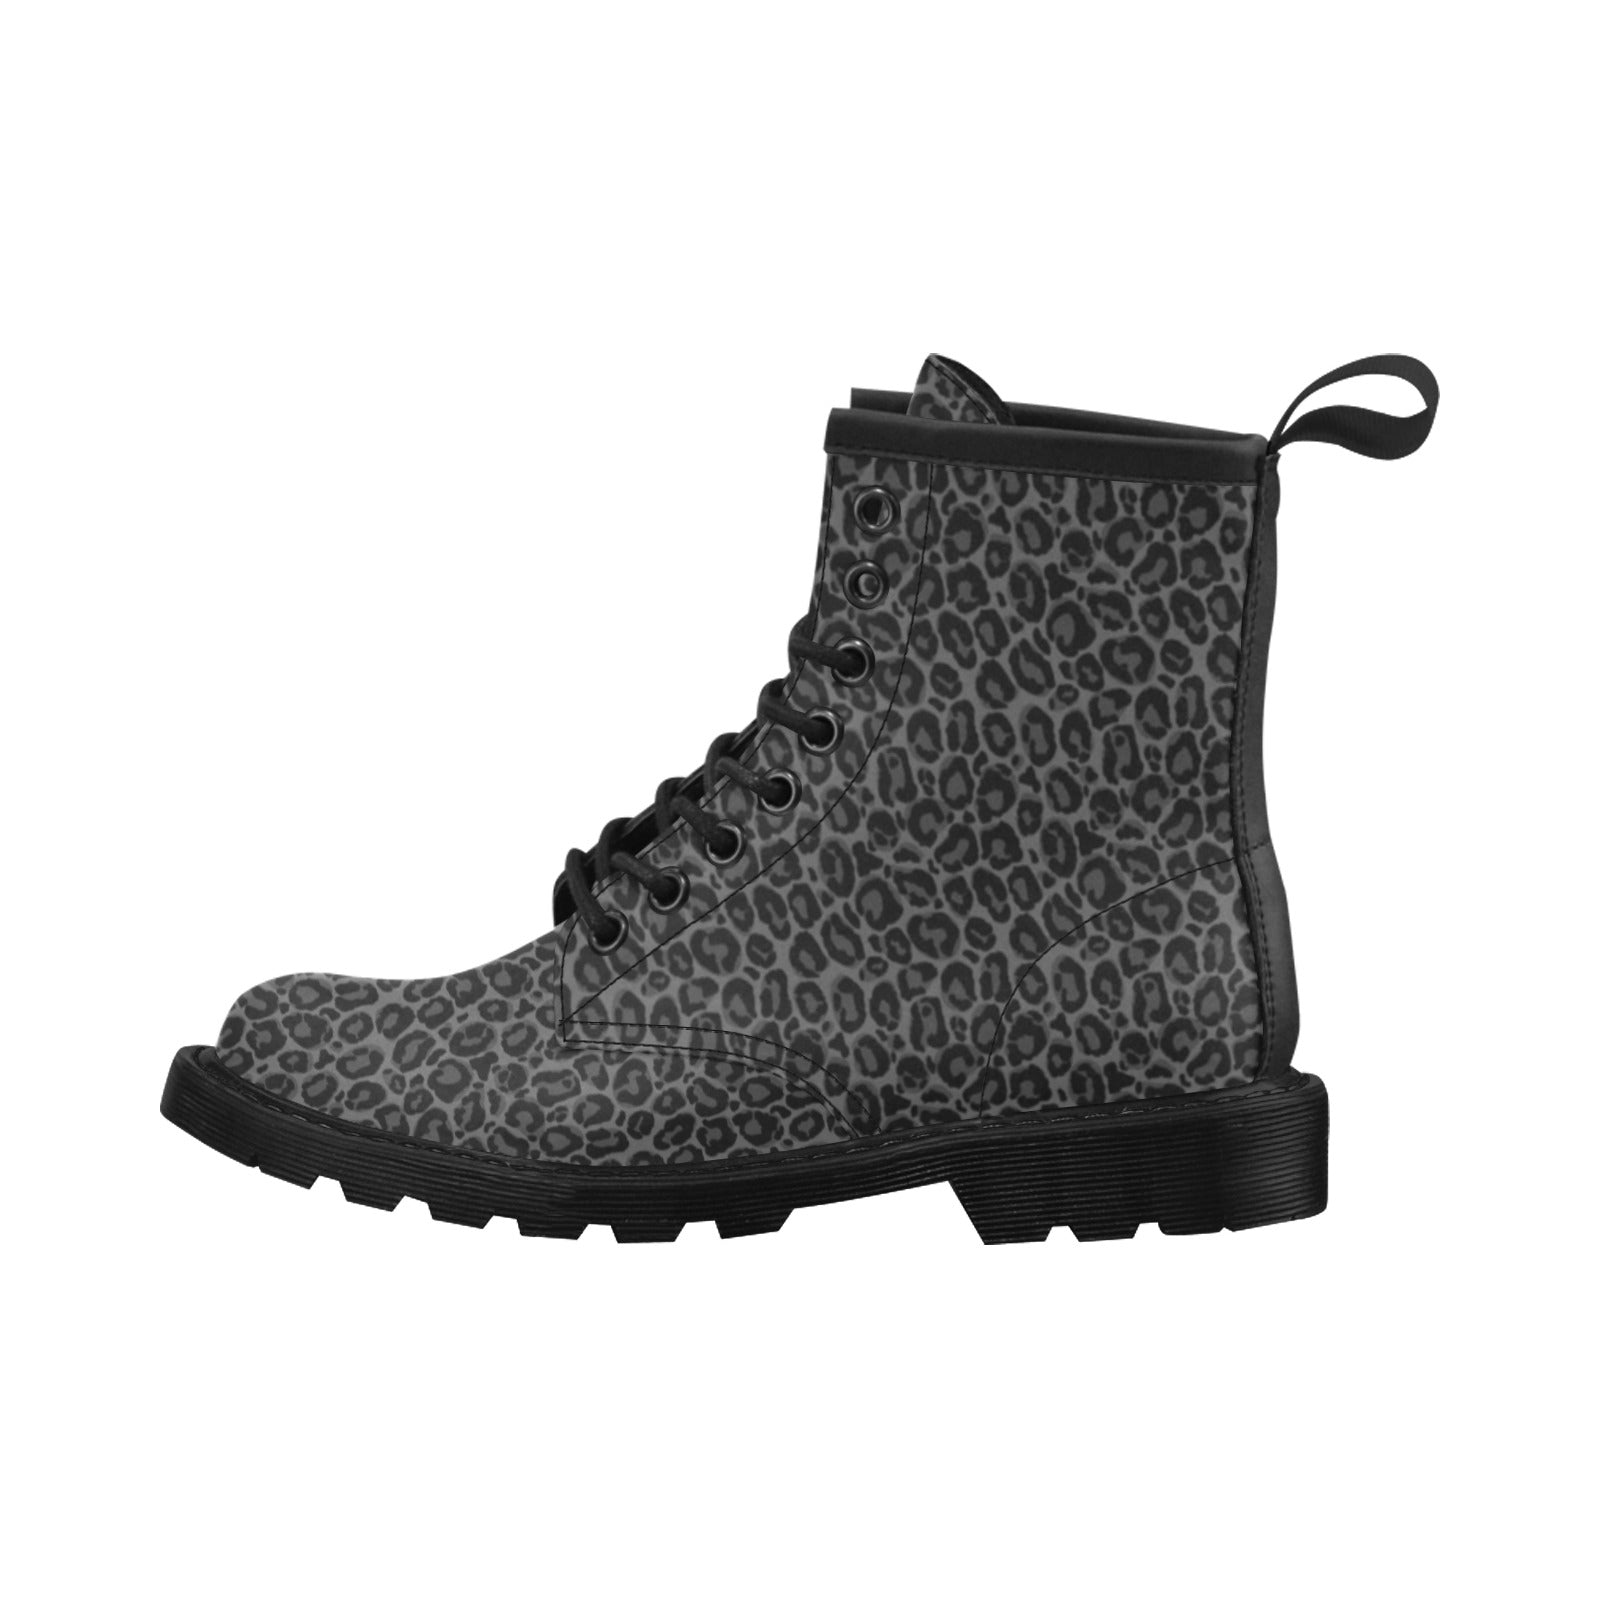 Black Leopard Men Leather Boots, Animal Print Lace Up Shoes Festival Black Ankle Combat Winter Custom Walking Hiking Pull On Designer Starcove Fashion